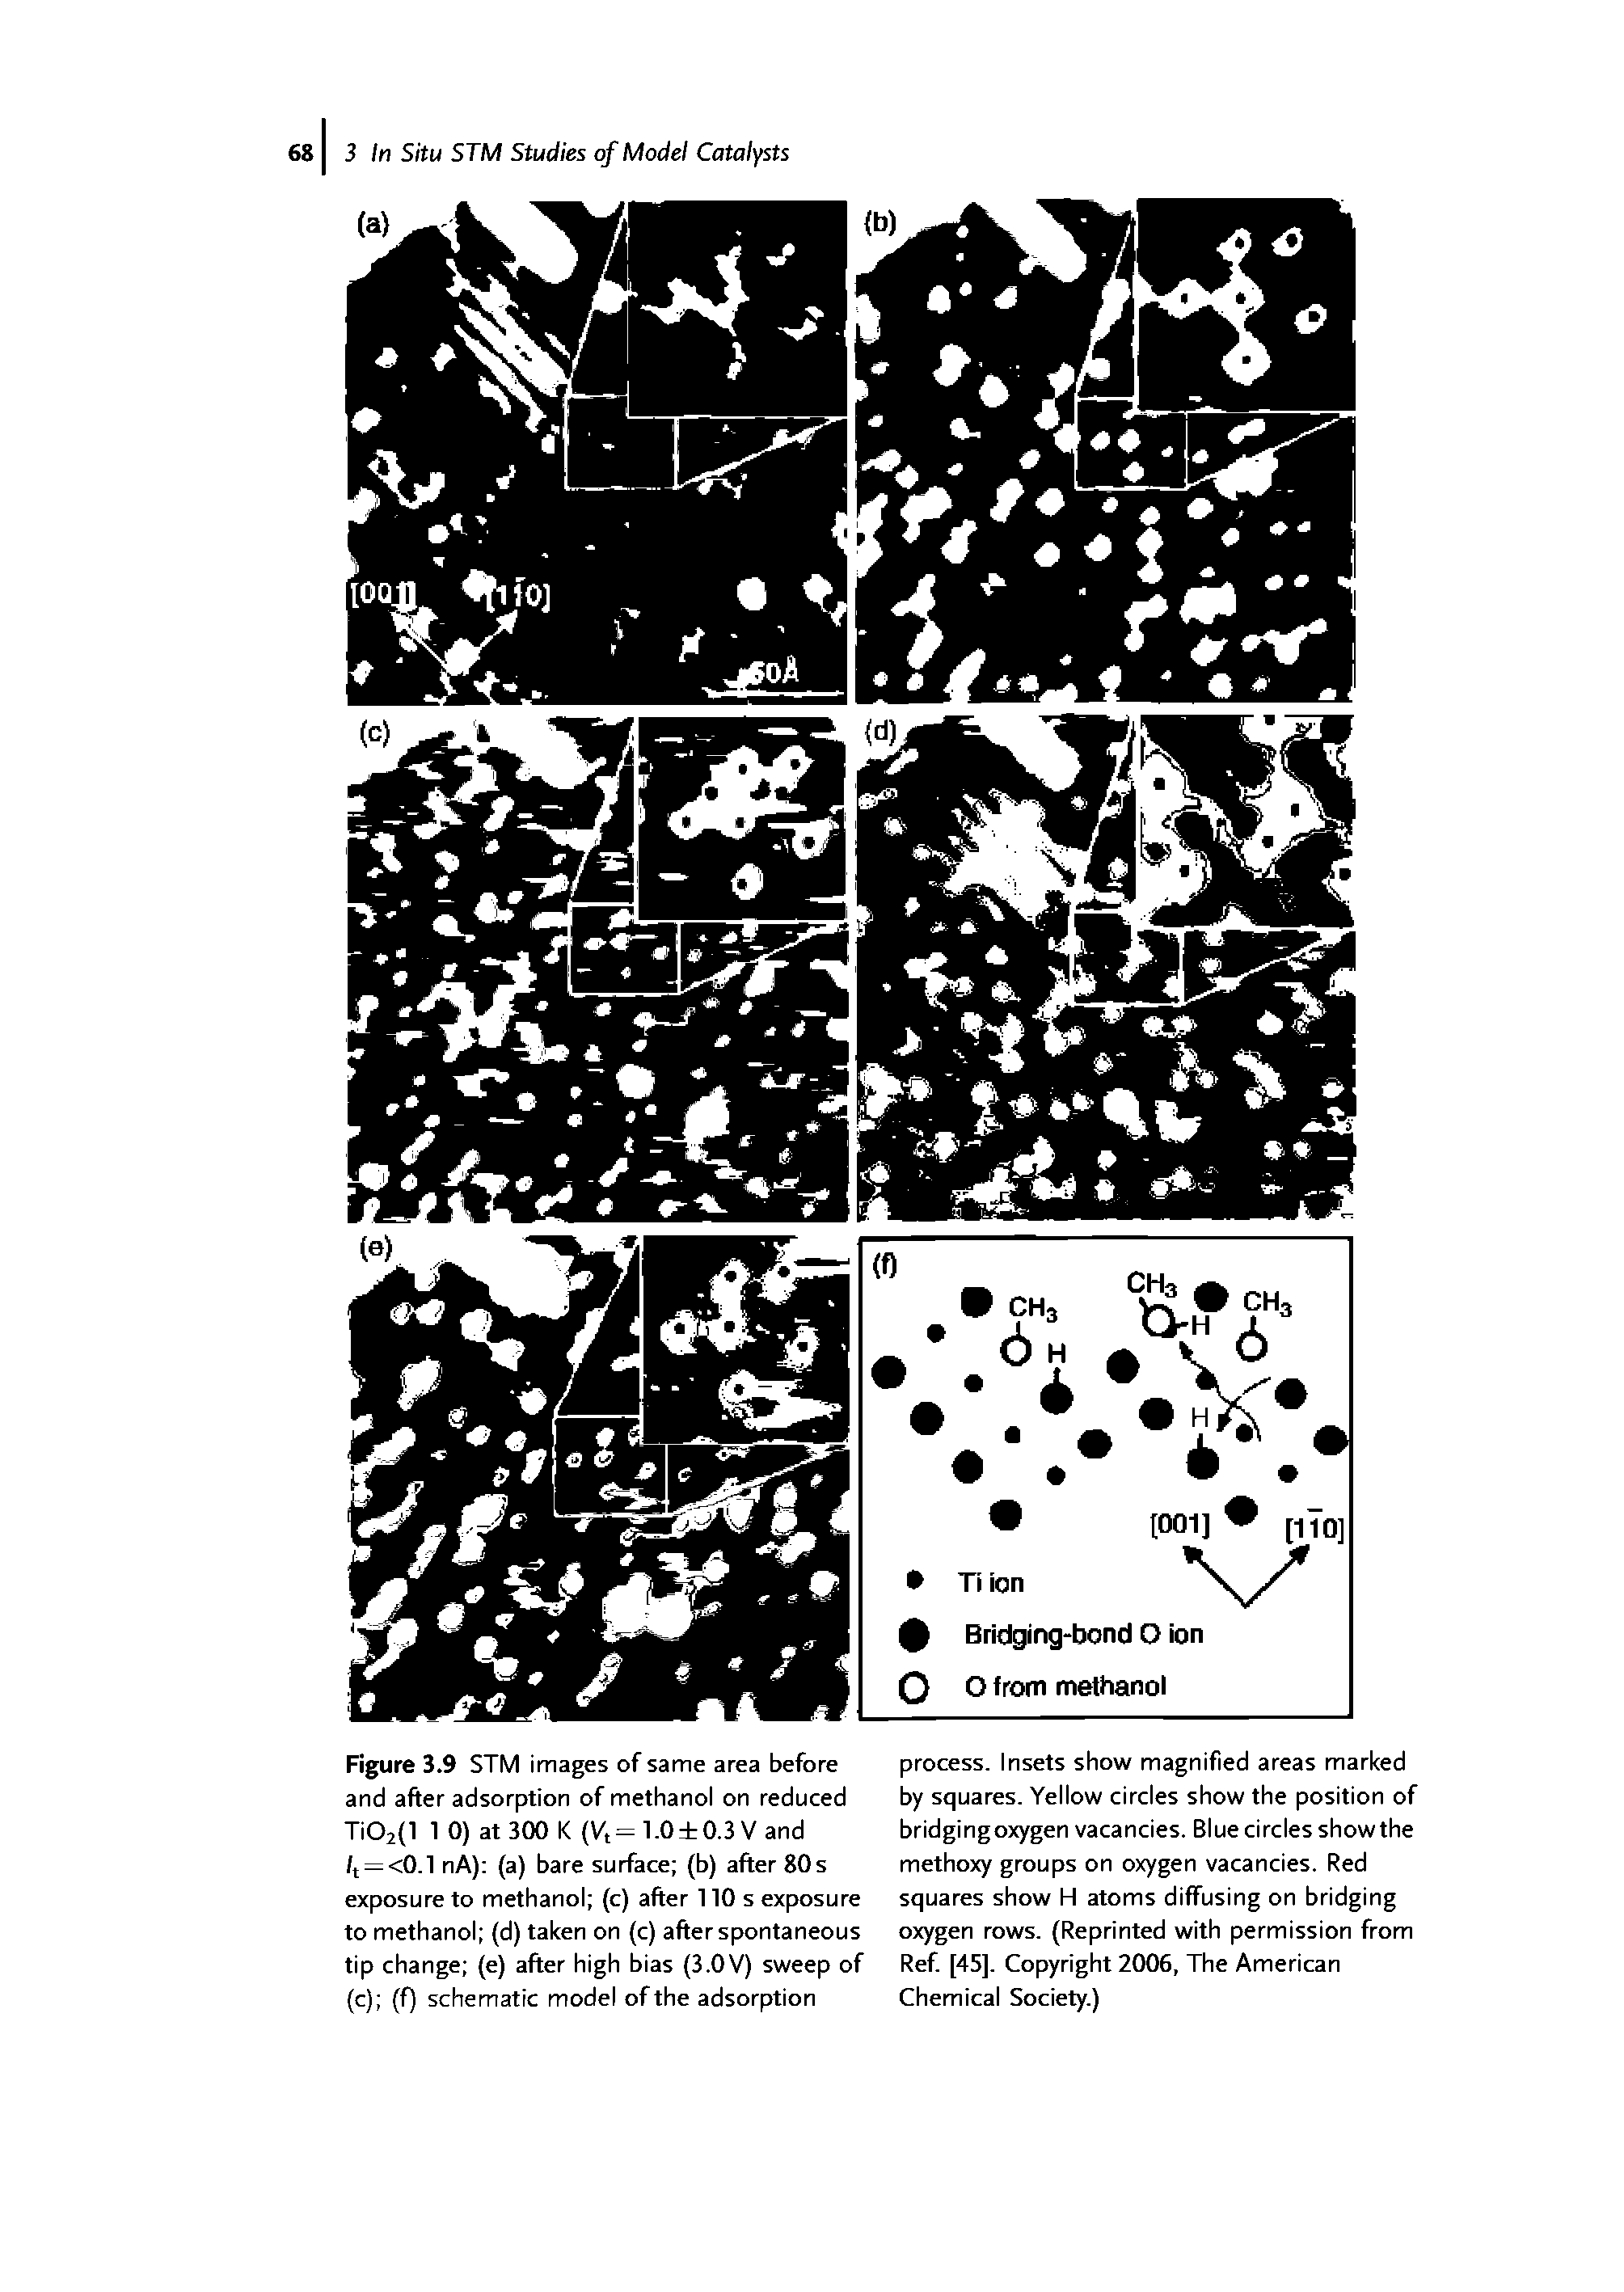 Figure 3.9 STM images of same area before and after adsorption of methanol on reduced Ti02(l 1 0) at 300 K (Vt = 1.0 0.3 V and /t = <0.1 nA) (a) bare surface (b) after 80s exposure to methanol (c) after 110 s exposure to methanol (d) taken on (c) after spontaneous tip change (e) after high bias (3.0V) sweep of (c) (f) schematic model of the adsorption...